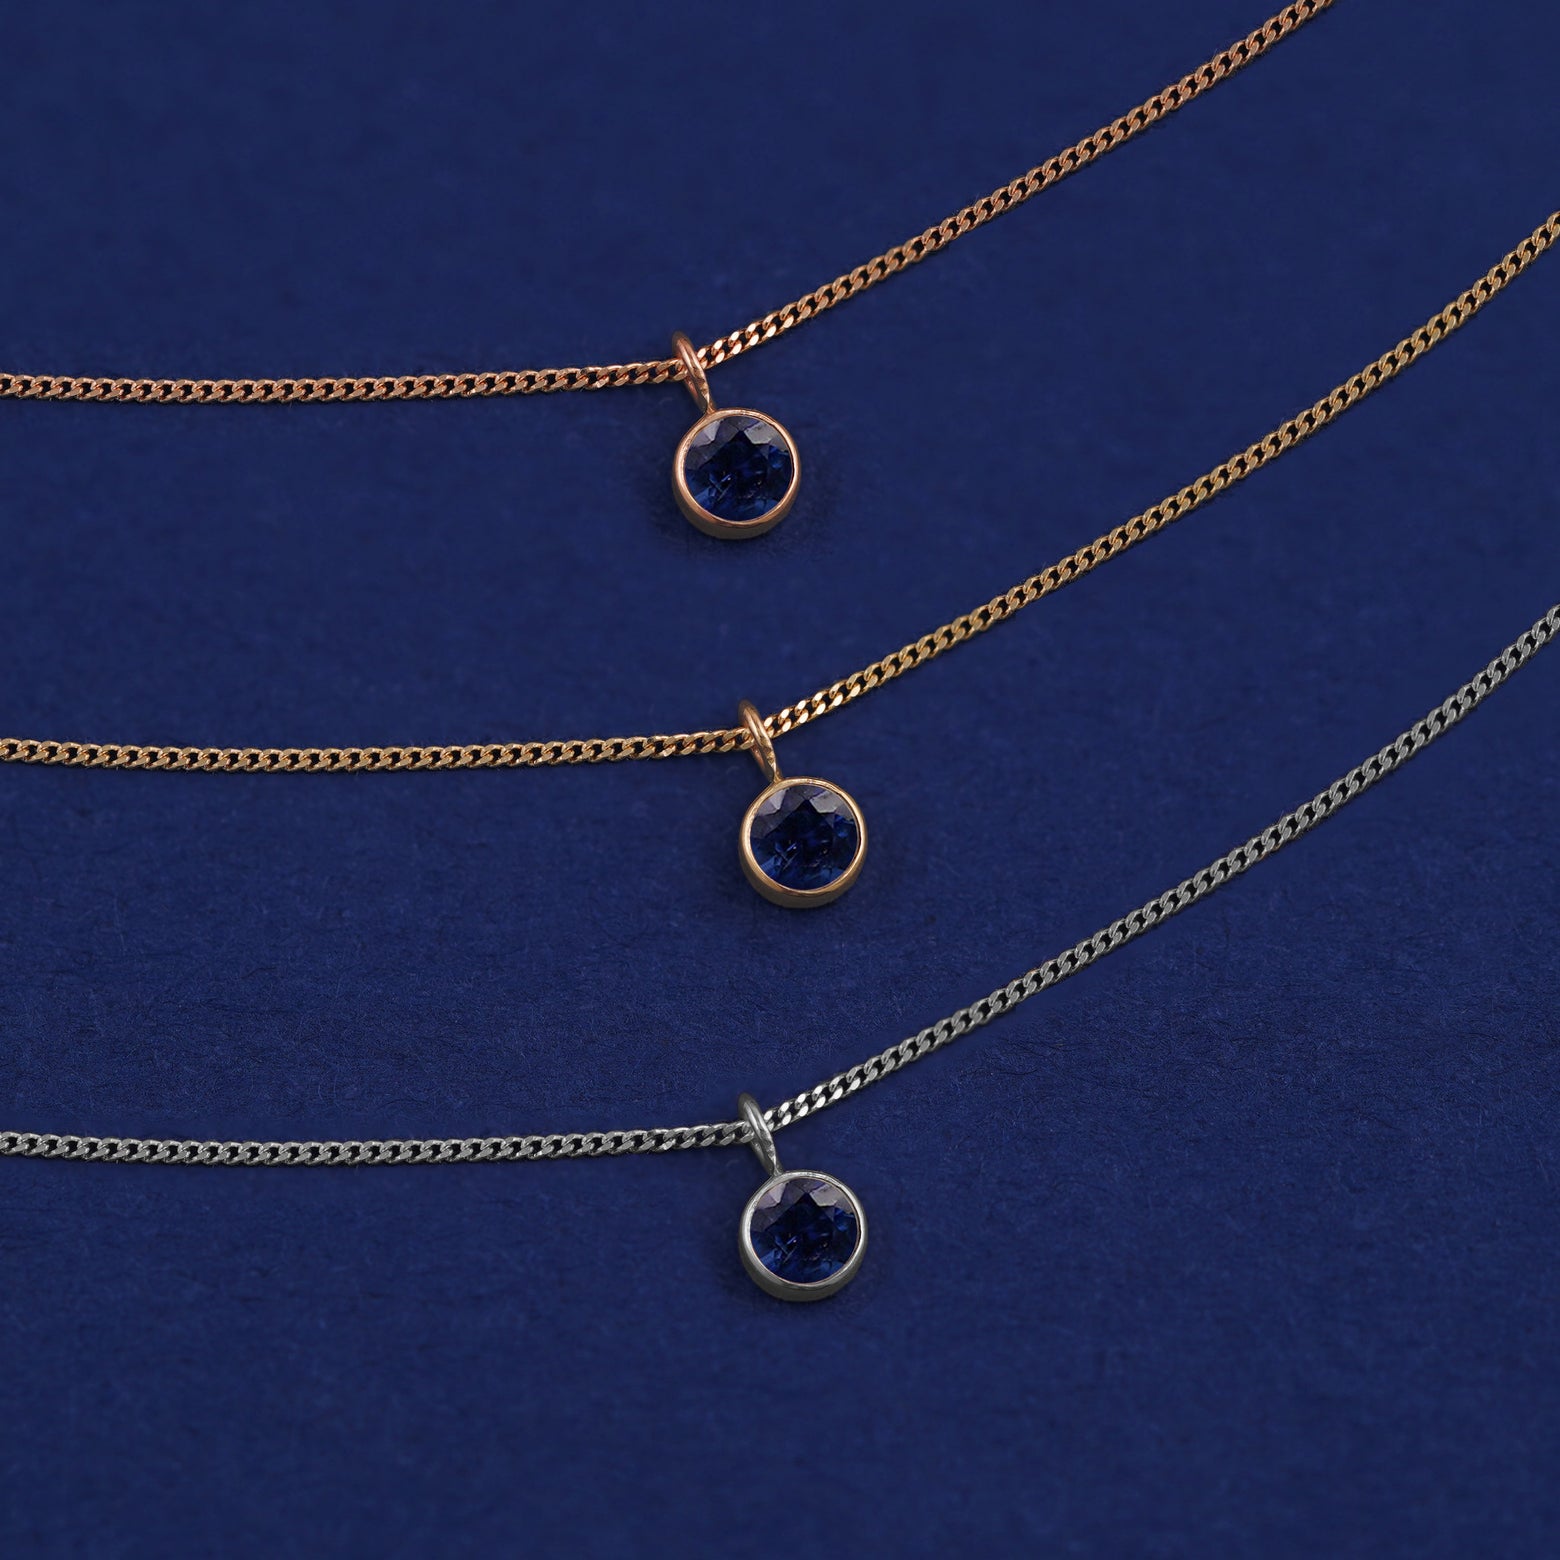 Three versions of the Sapphire Necklace in options of yellow, white, and rose gold on a dark blue background